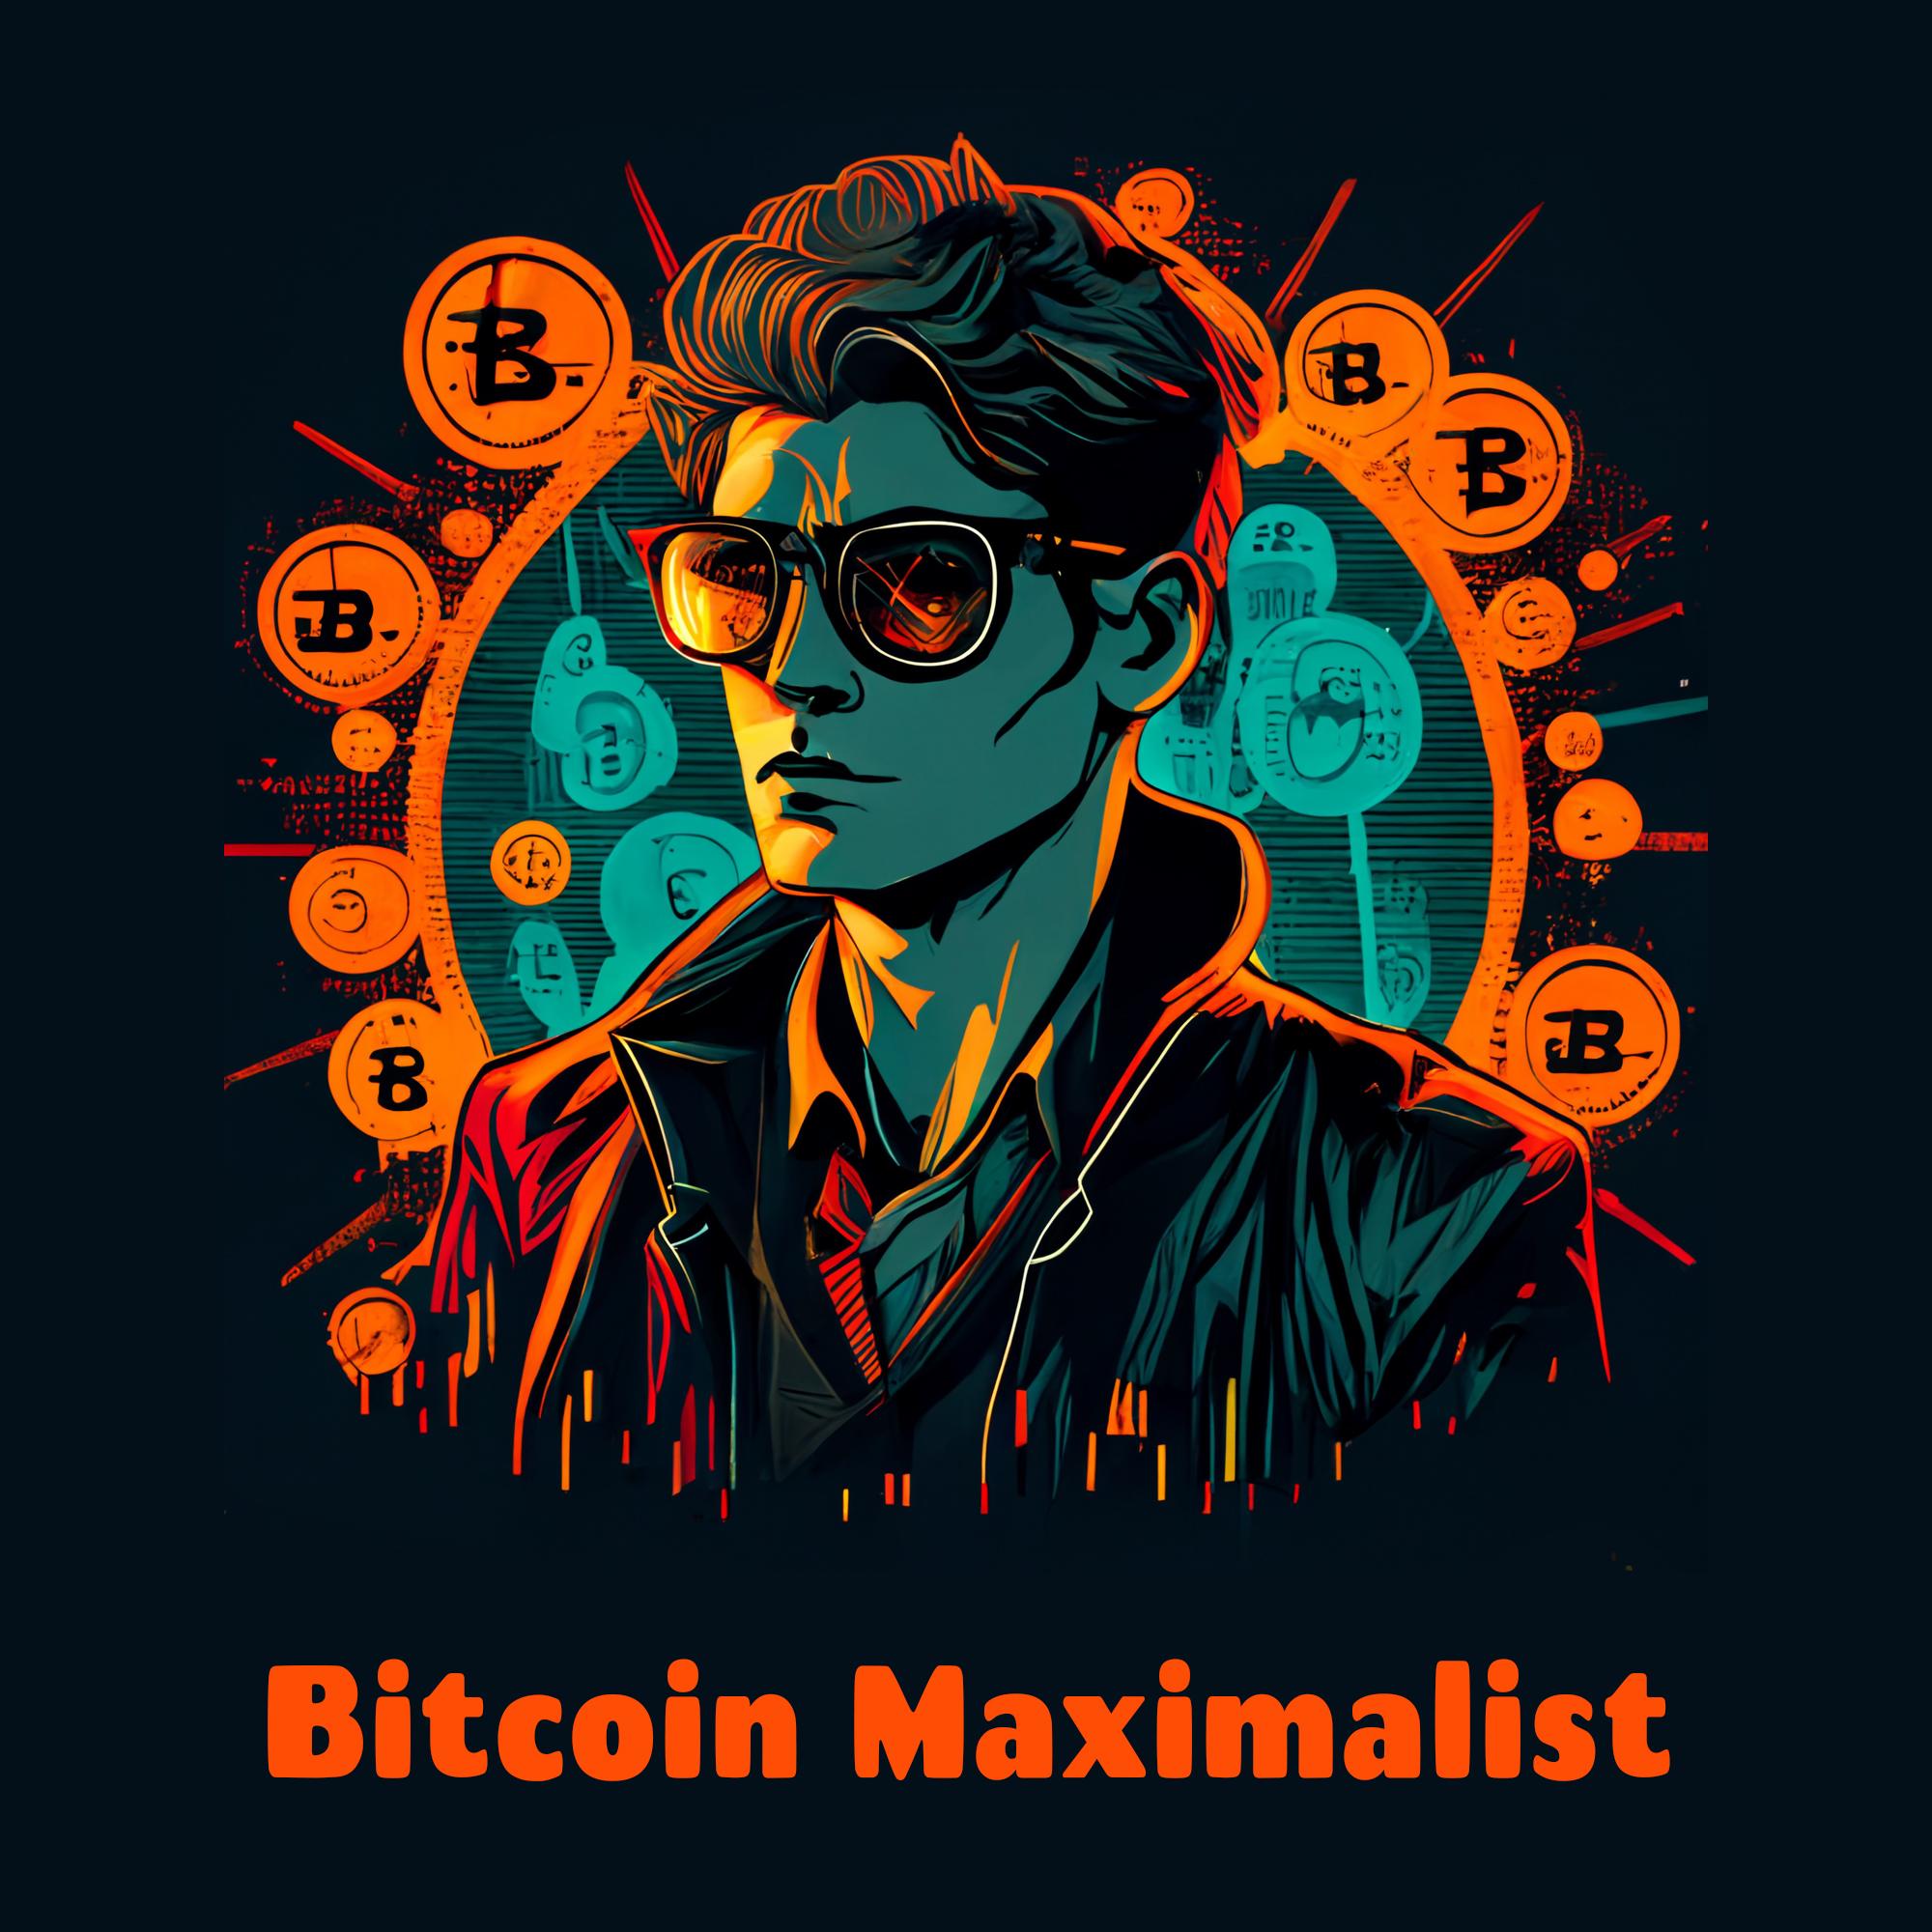 A cool man in dark glasses surrounded by bitcoins (Bitcoin Maximalist) NFT cruzo